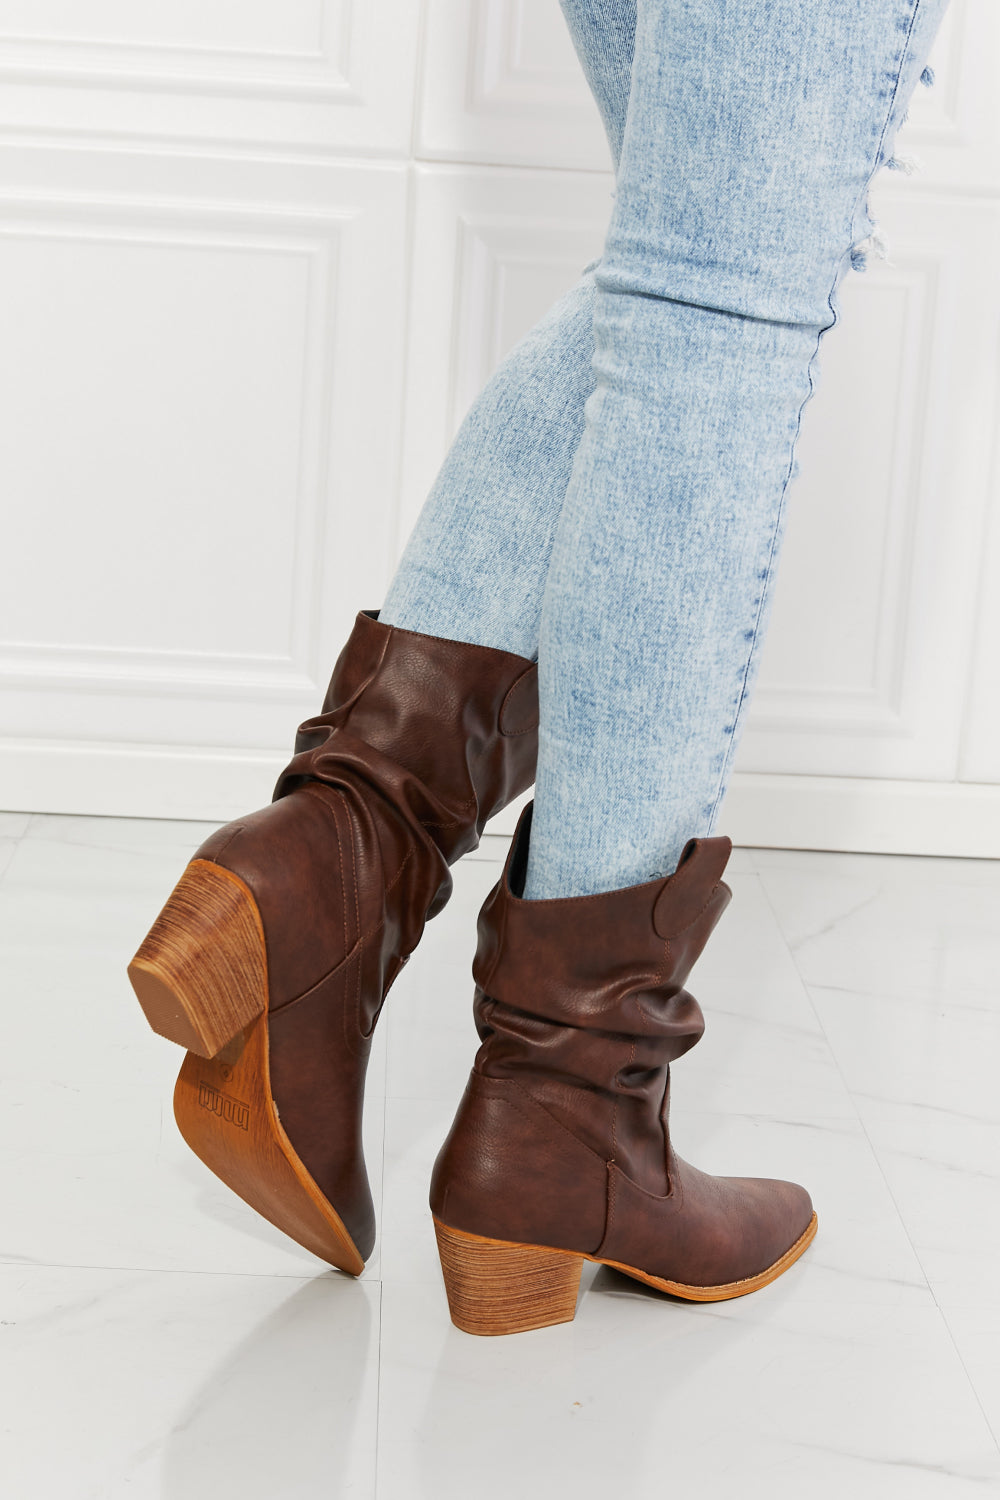 Better in Texas Scrunch Cowboy Boots in Brown - Southern Soul Collectives